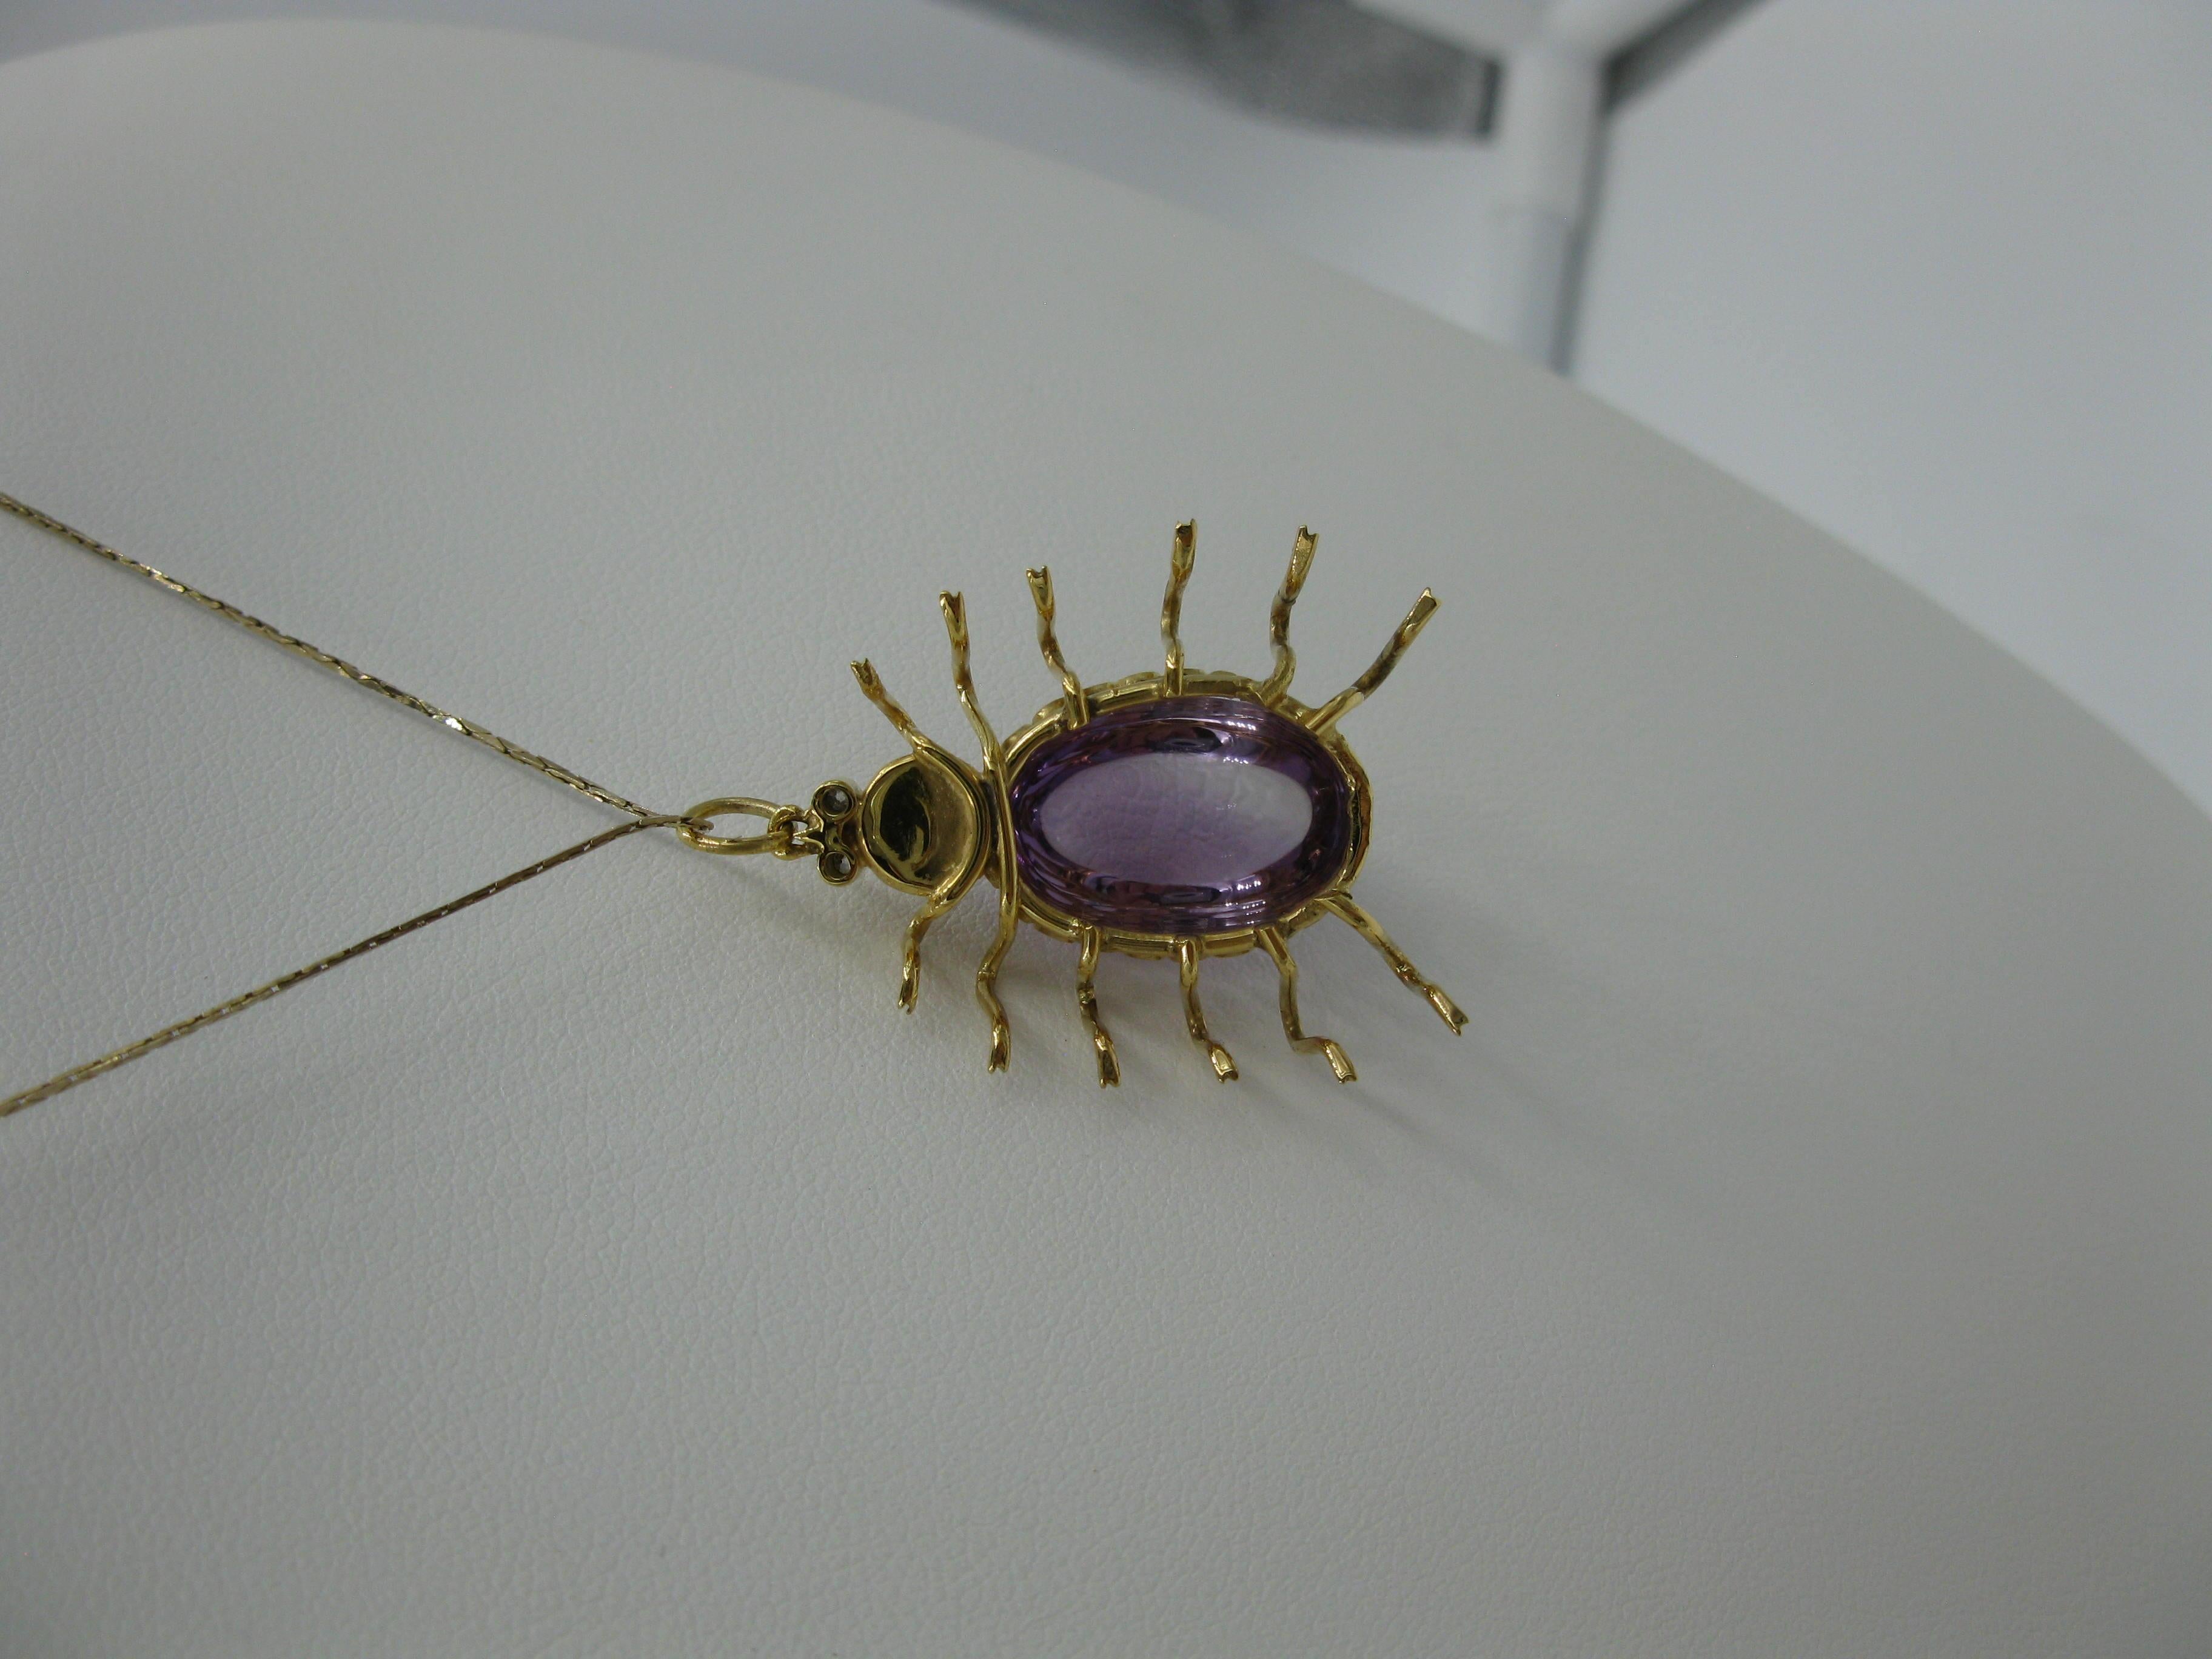 Antique 10 Carat Amethyst Diamond Spider Insect Pendant Necklace Vintage Gold For Sale 4